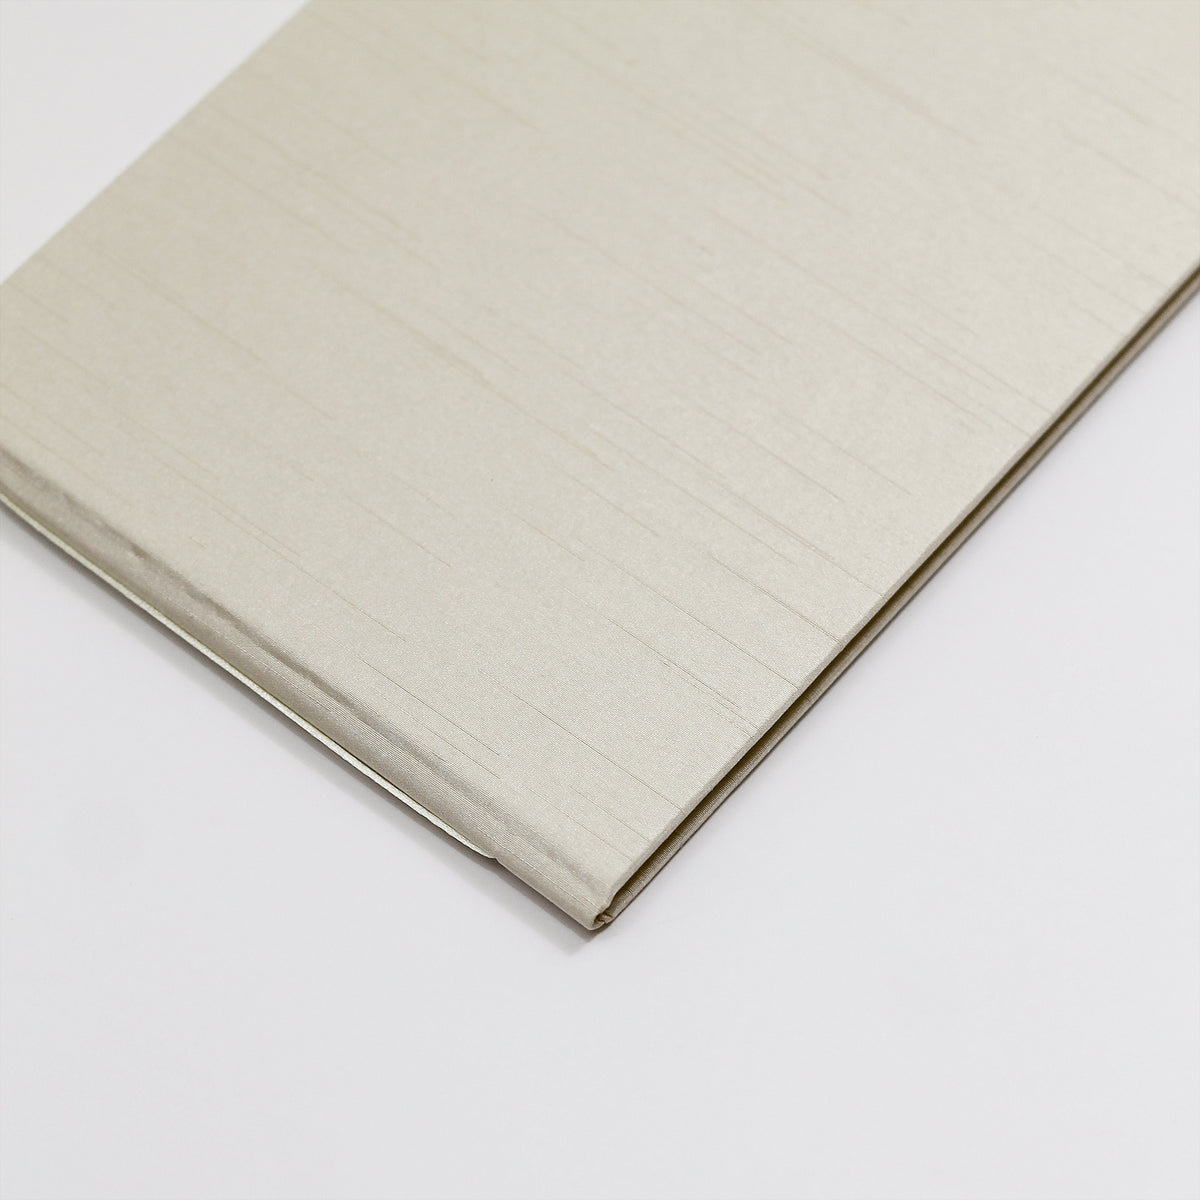 Classic Guestbook | Cover: Champagne Silk | Available Personalized